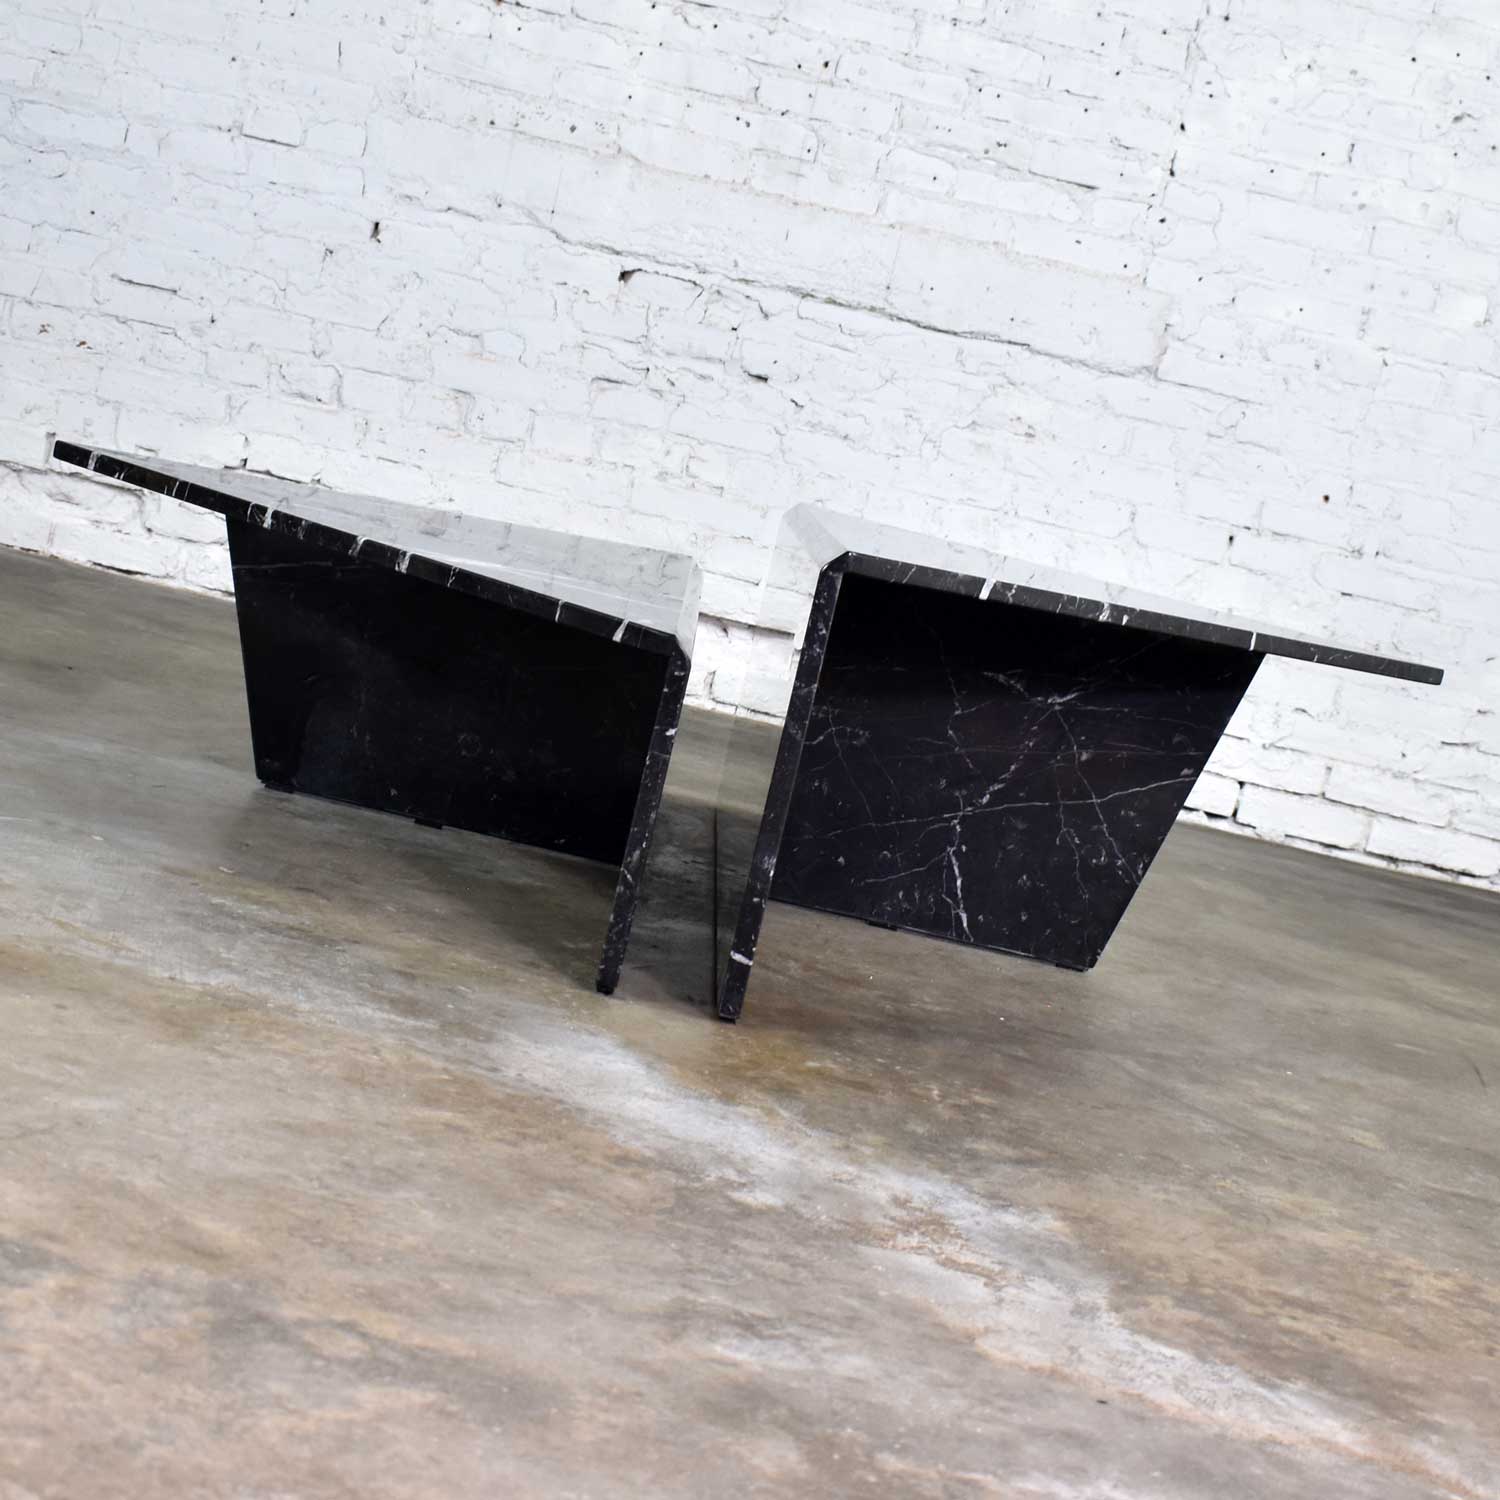 Black Marble Triangle Bi-Level Pair Tables as Coffee Table or End Tables Style Up & Up